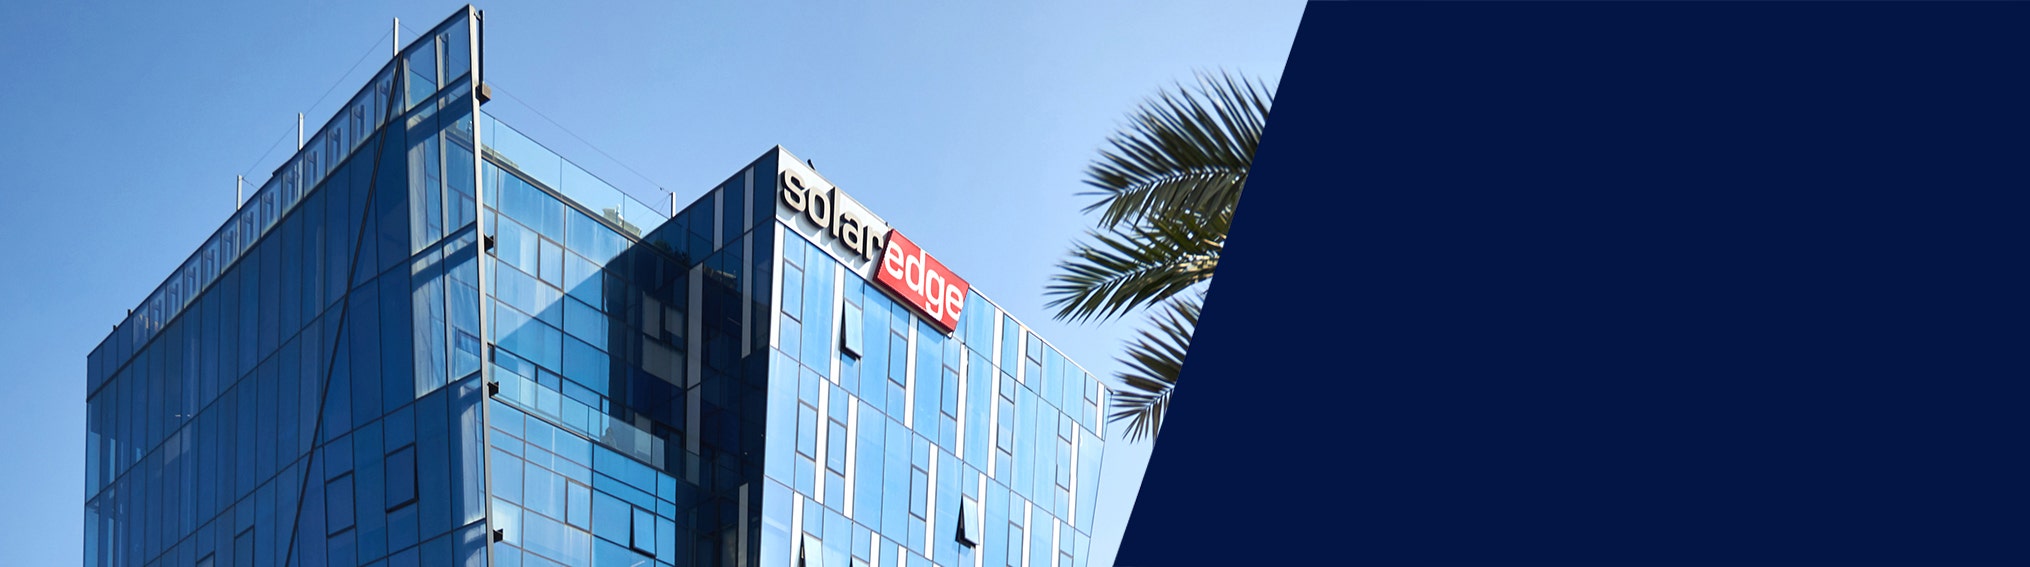 SolarEdge Analysts Highlight Accelerating Demand With Margin Upside Post Q3 Results